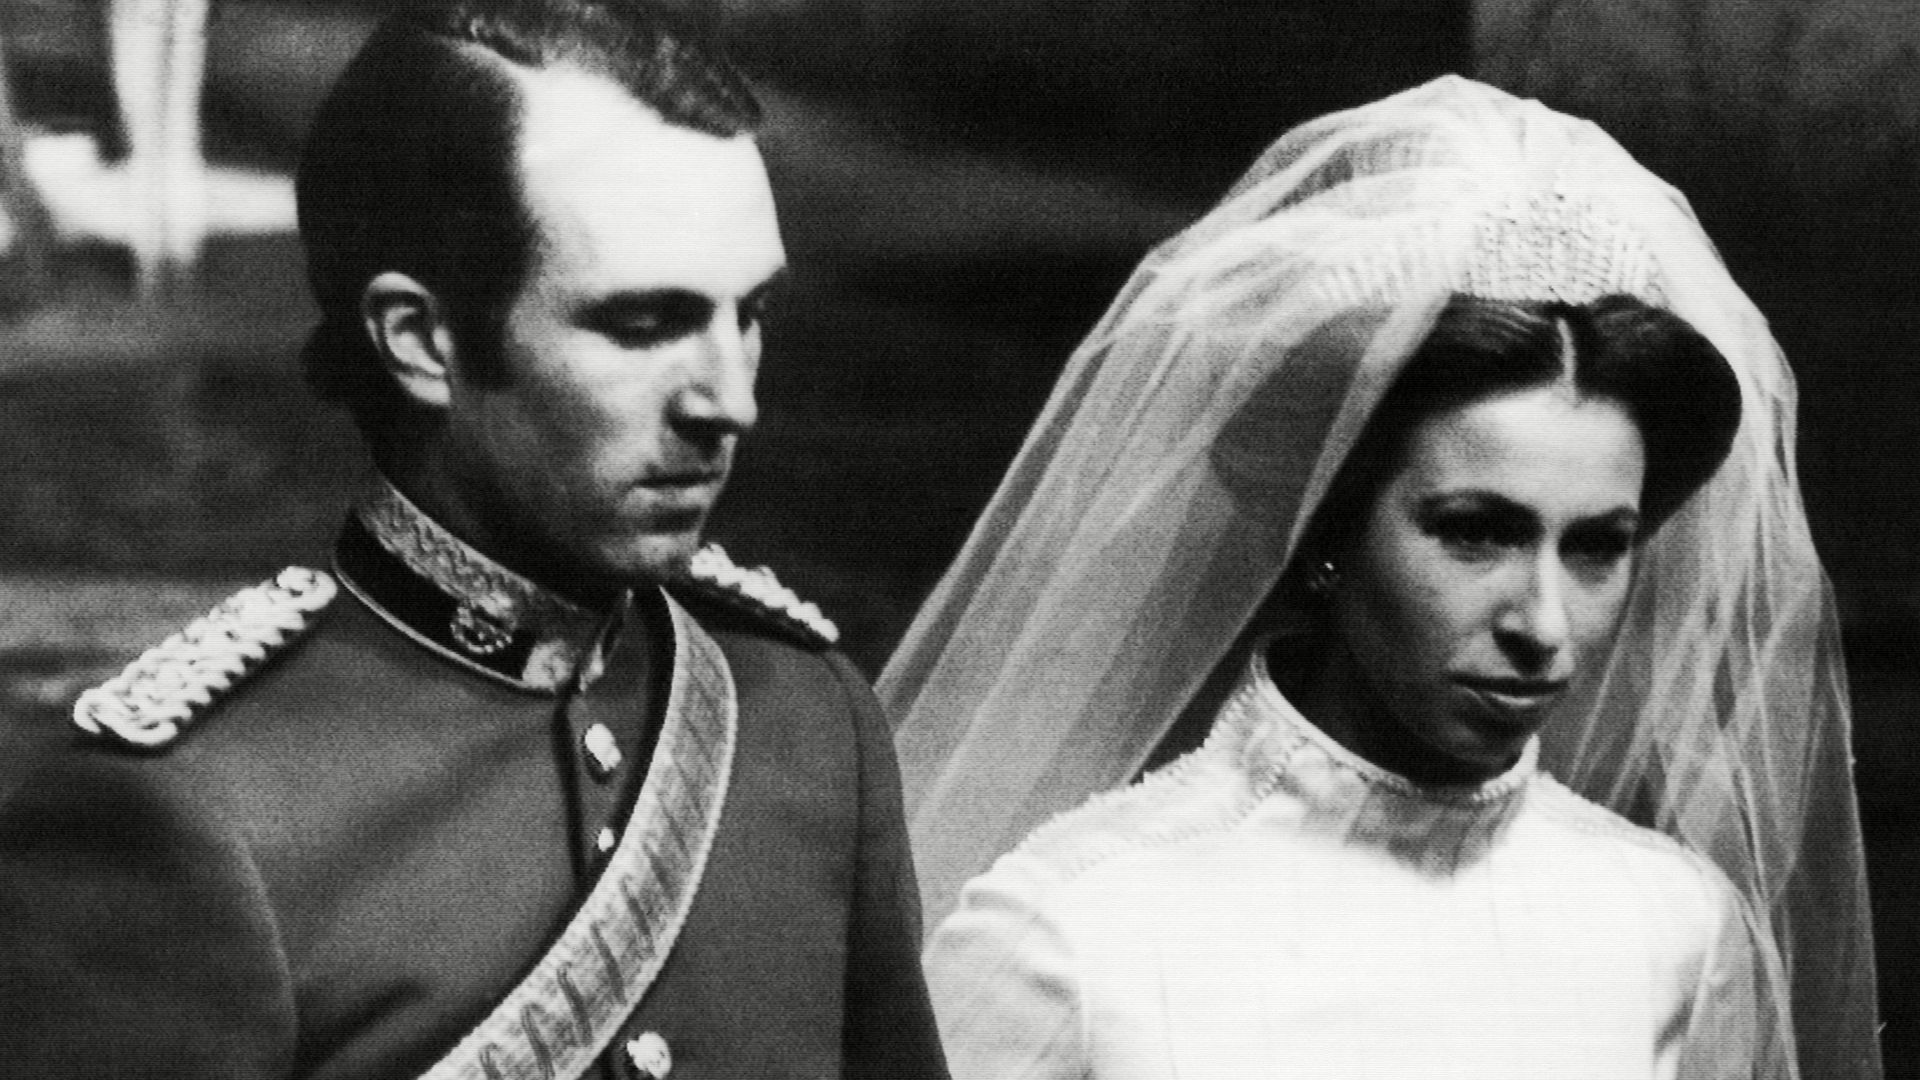 Princess Anne and Lieutenant Mark Phillips following their wedding in 1973